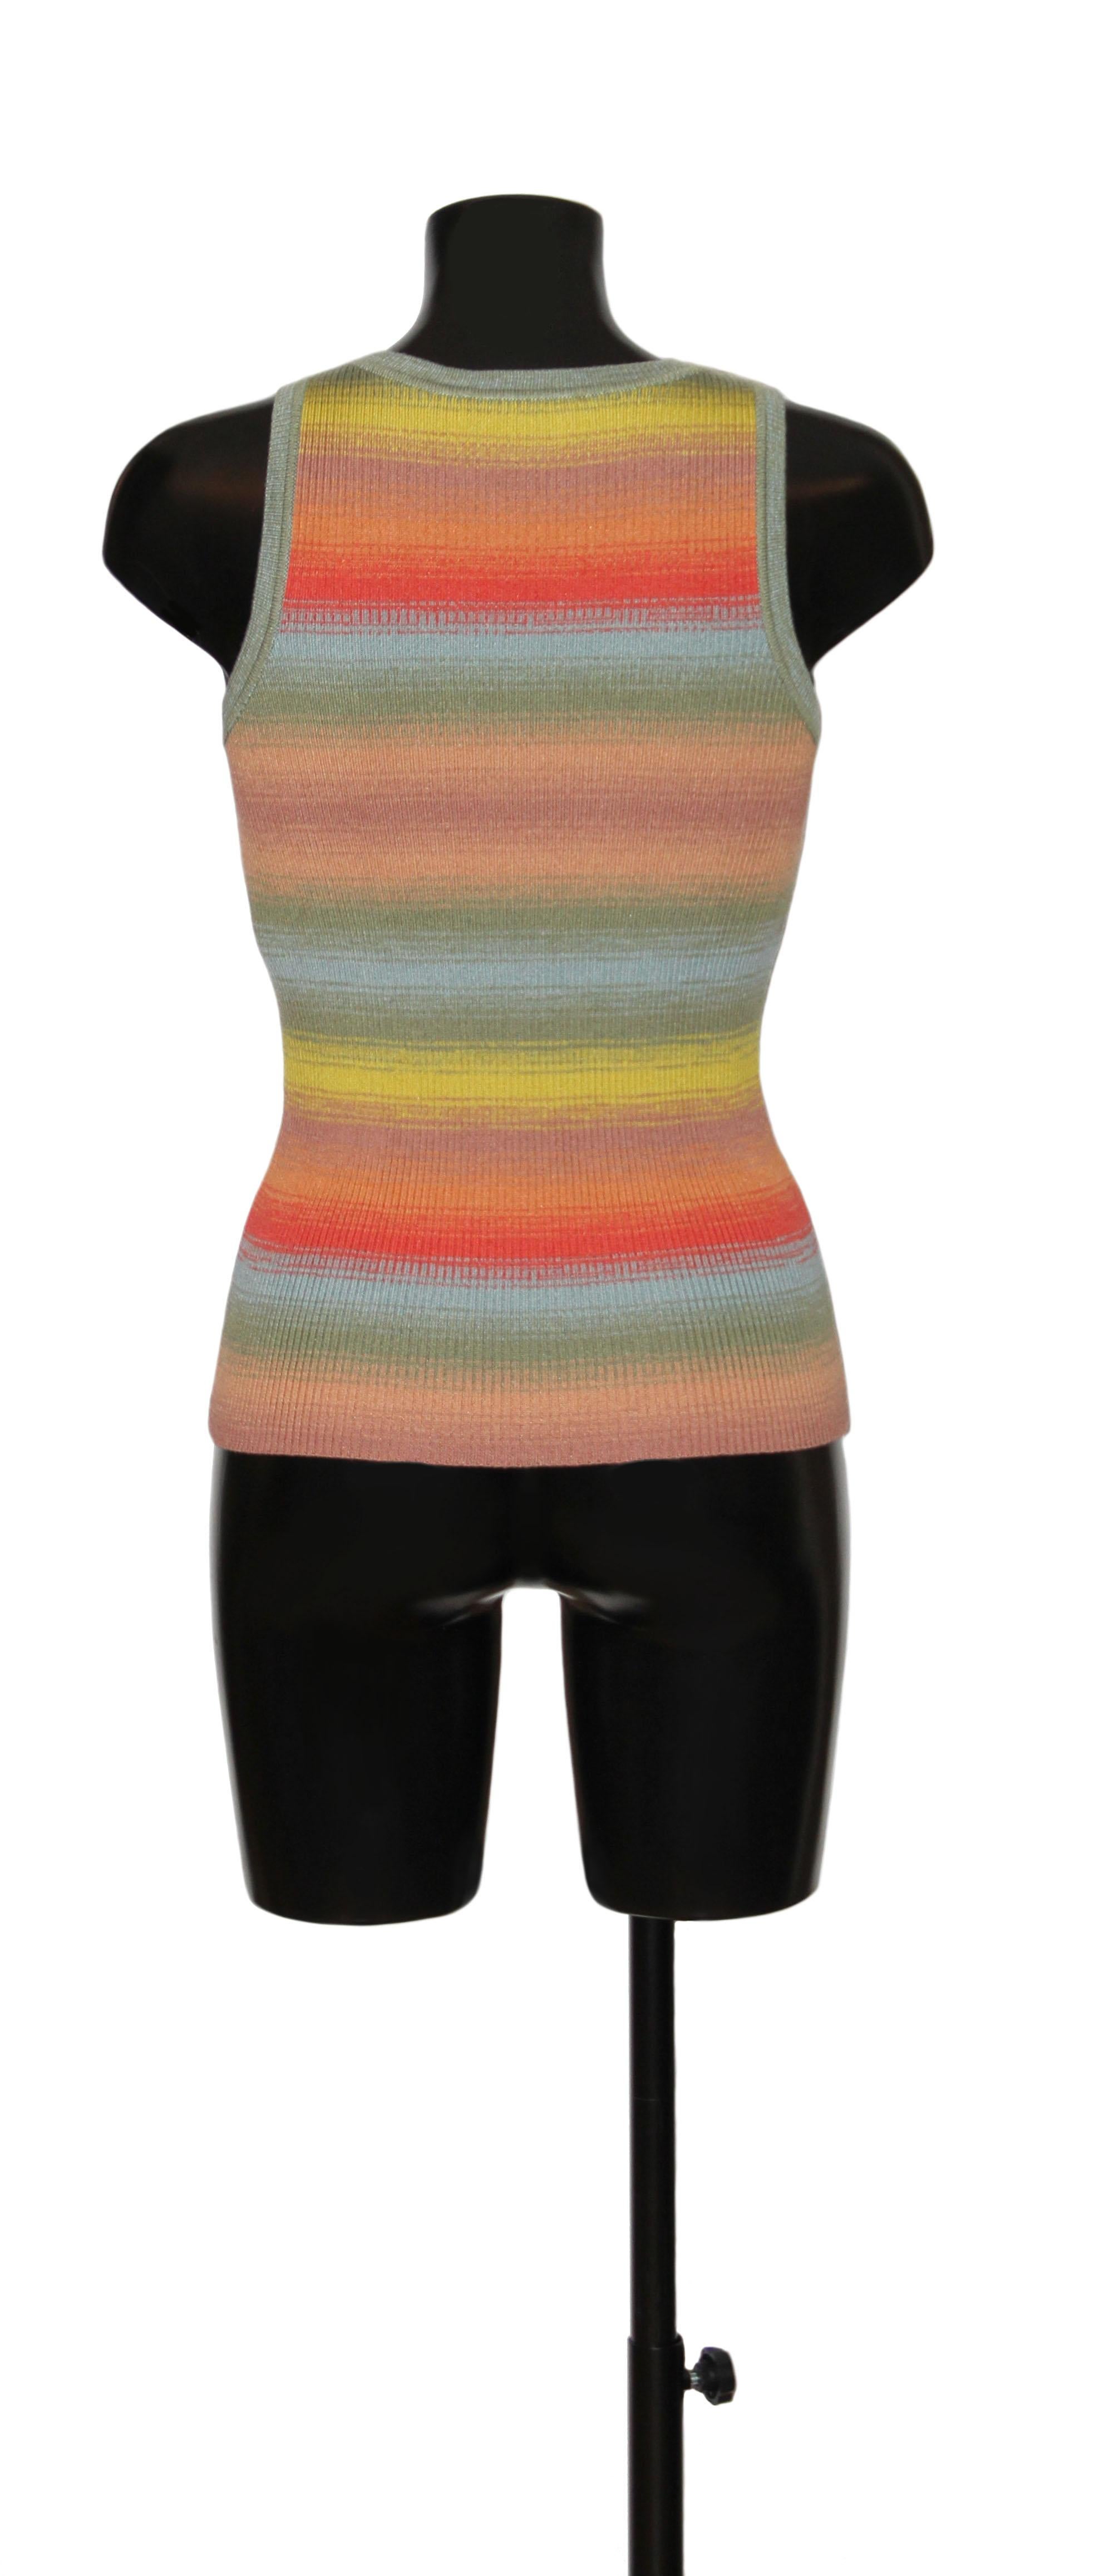 This pre-owned but New Dioraura tank-top is part of the Dioriviera capsule collection.
It is made in a multicolor ribbed weave knit.

Collection: Dioriviera Capsule 2020
Fabric: 70% wool - 30% silk
Color: multicolor
Size: FR38
Condition: as new
Made